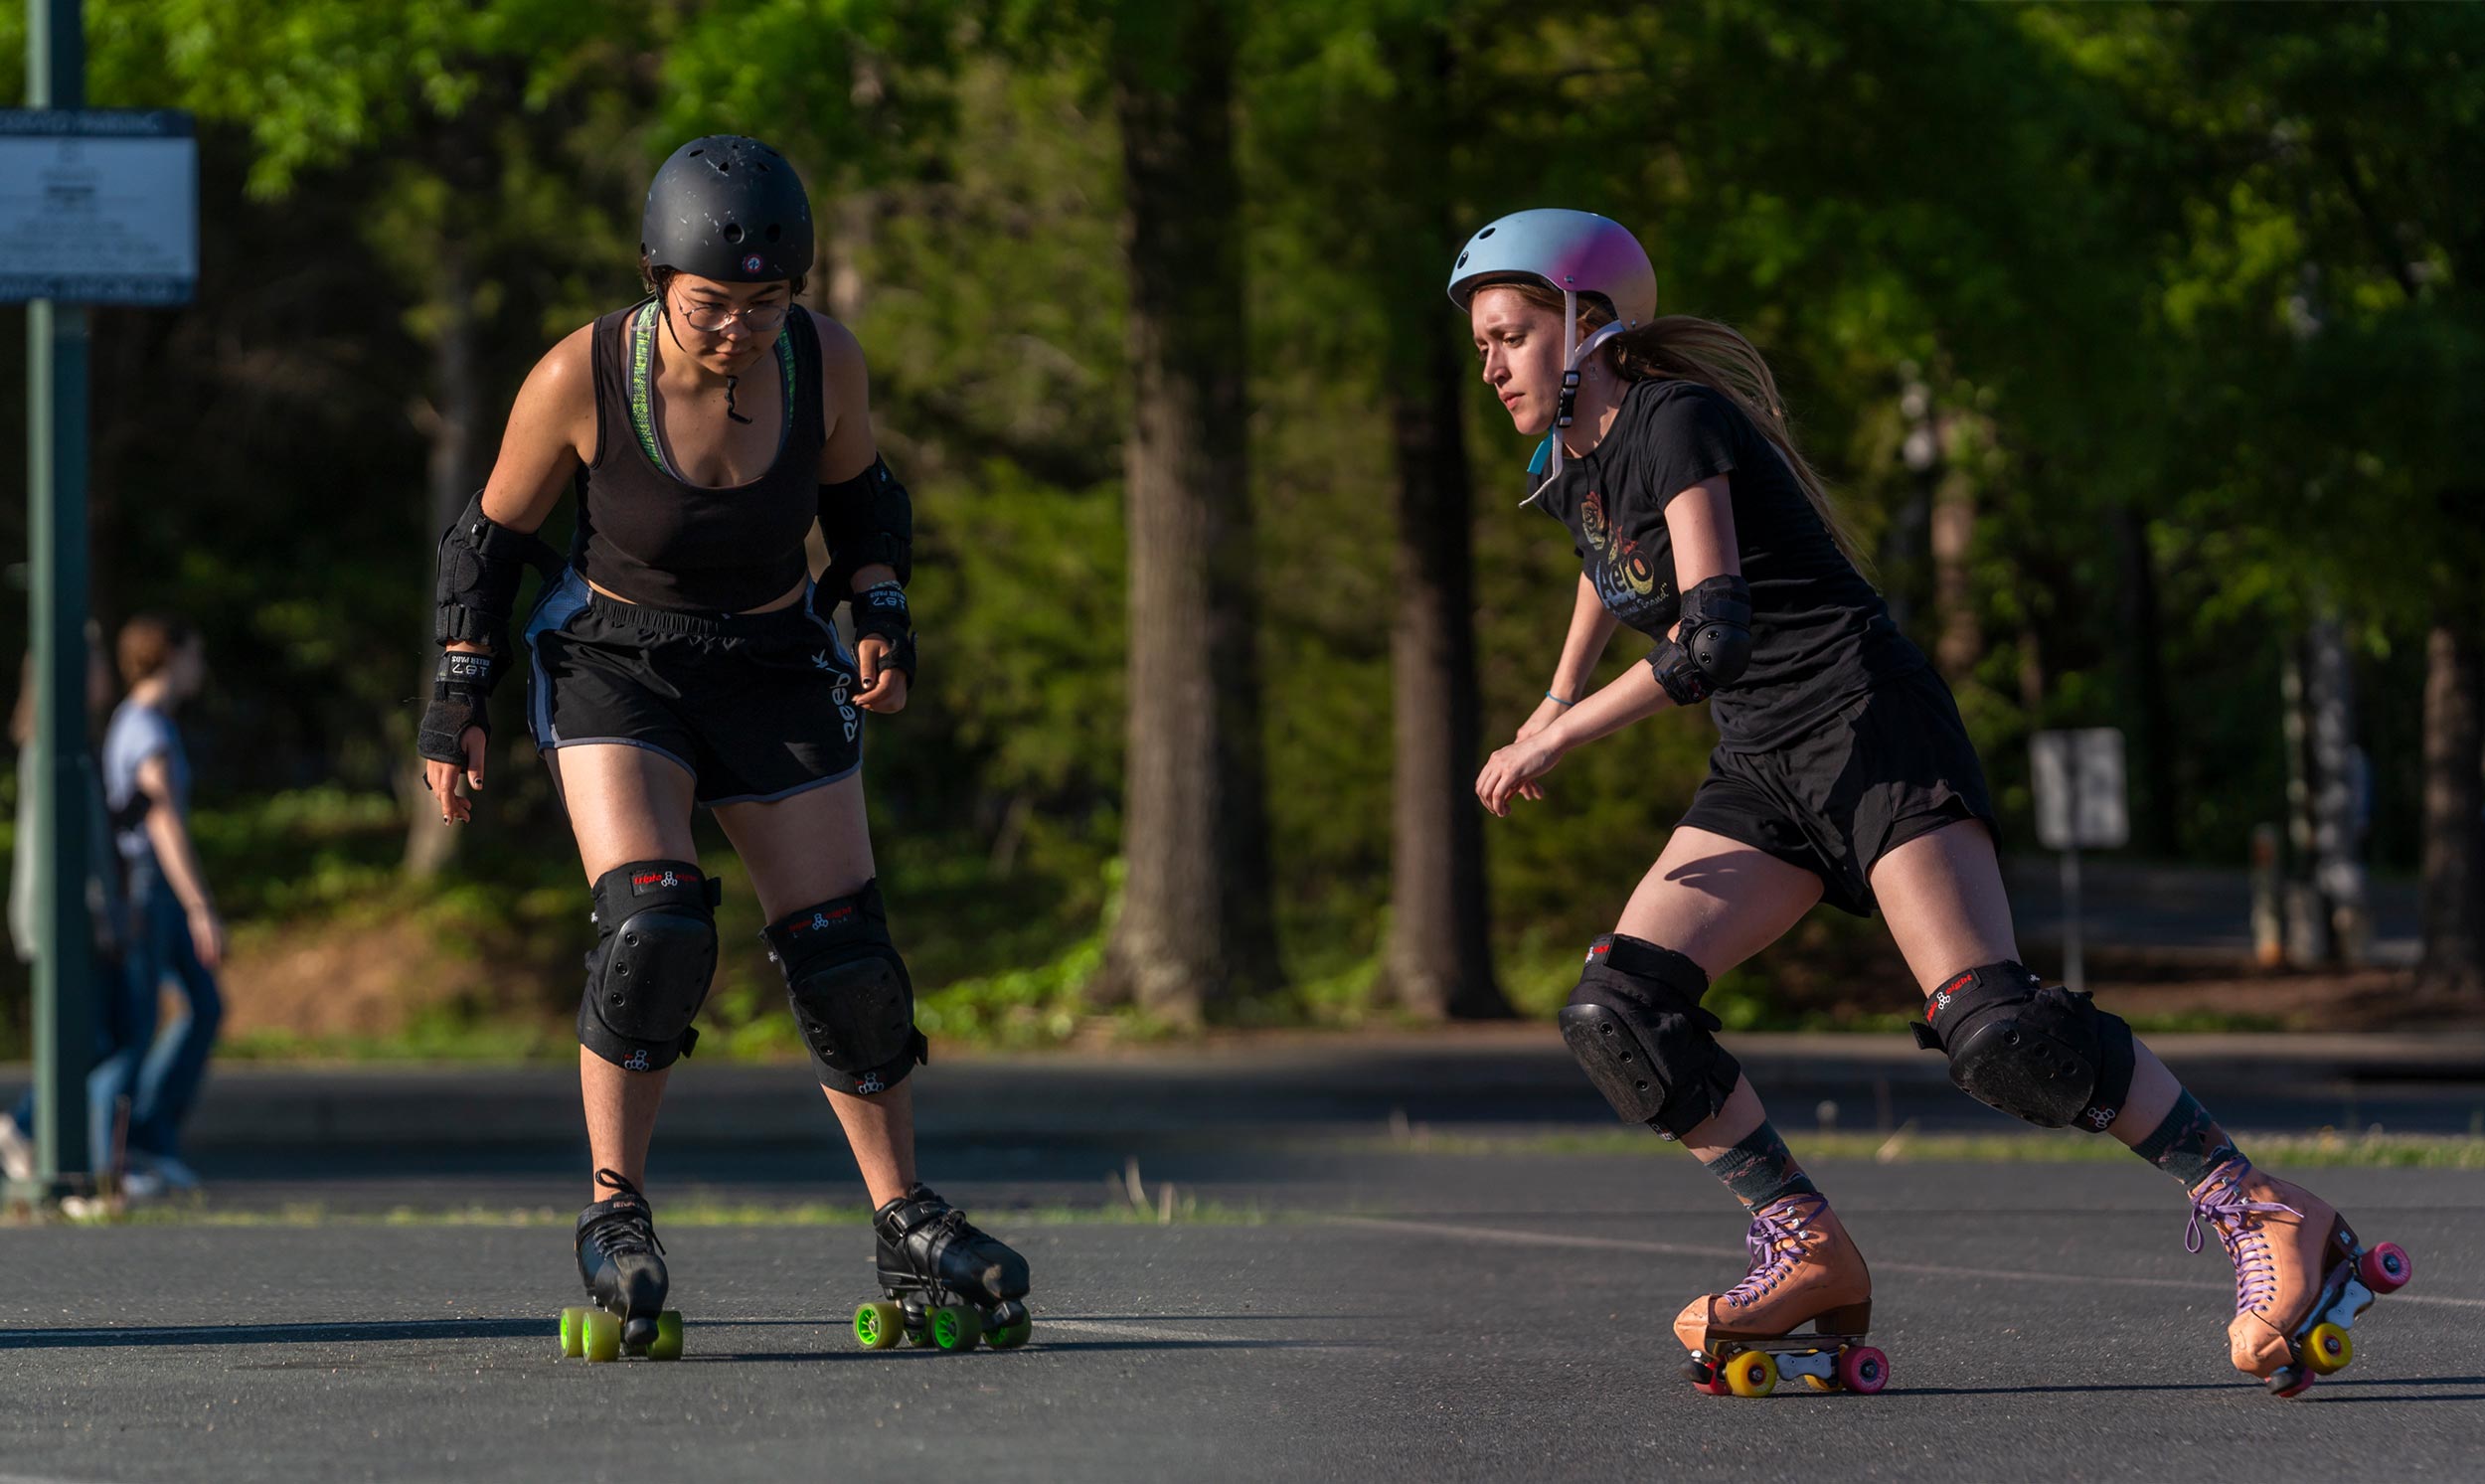 Two skaters in motion during a roller derby drill